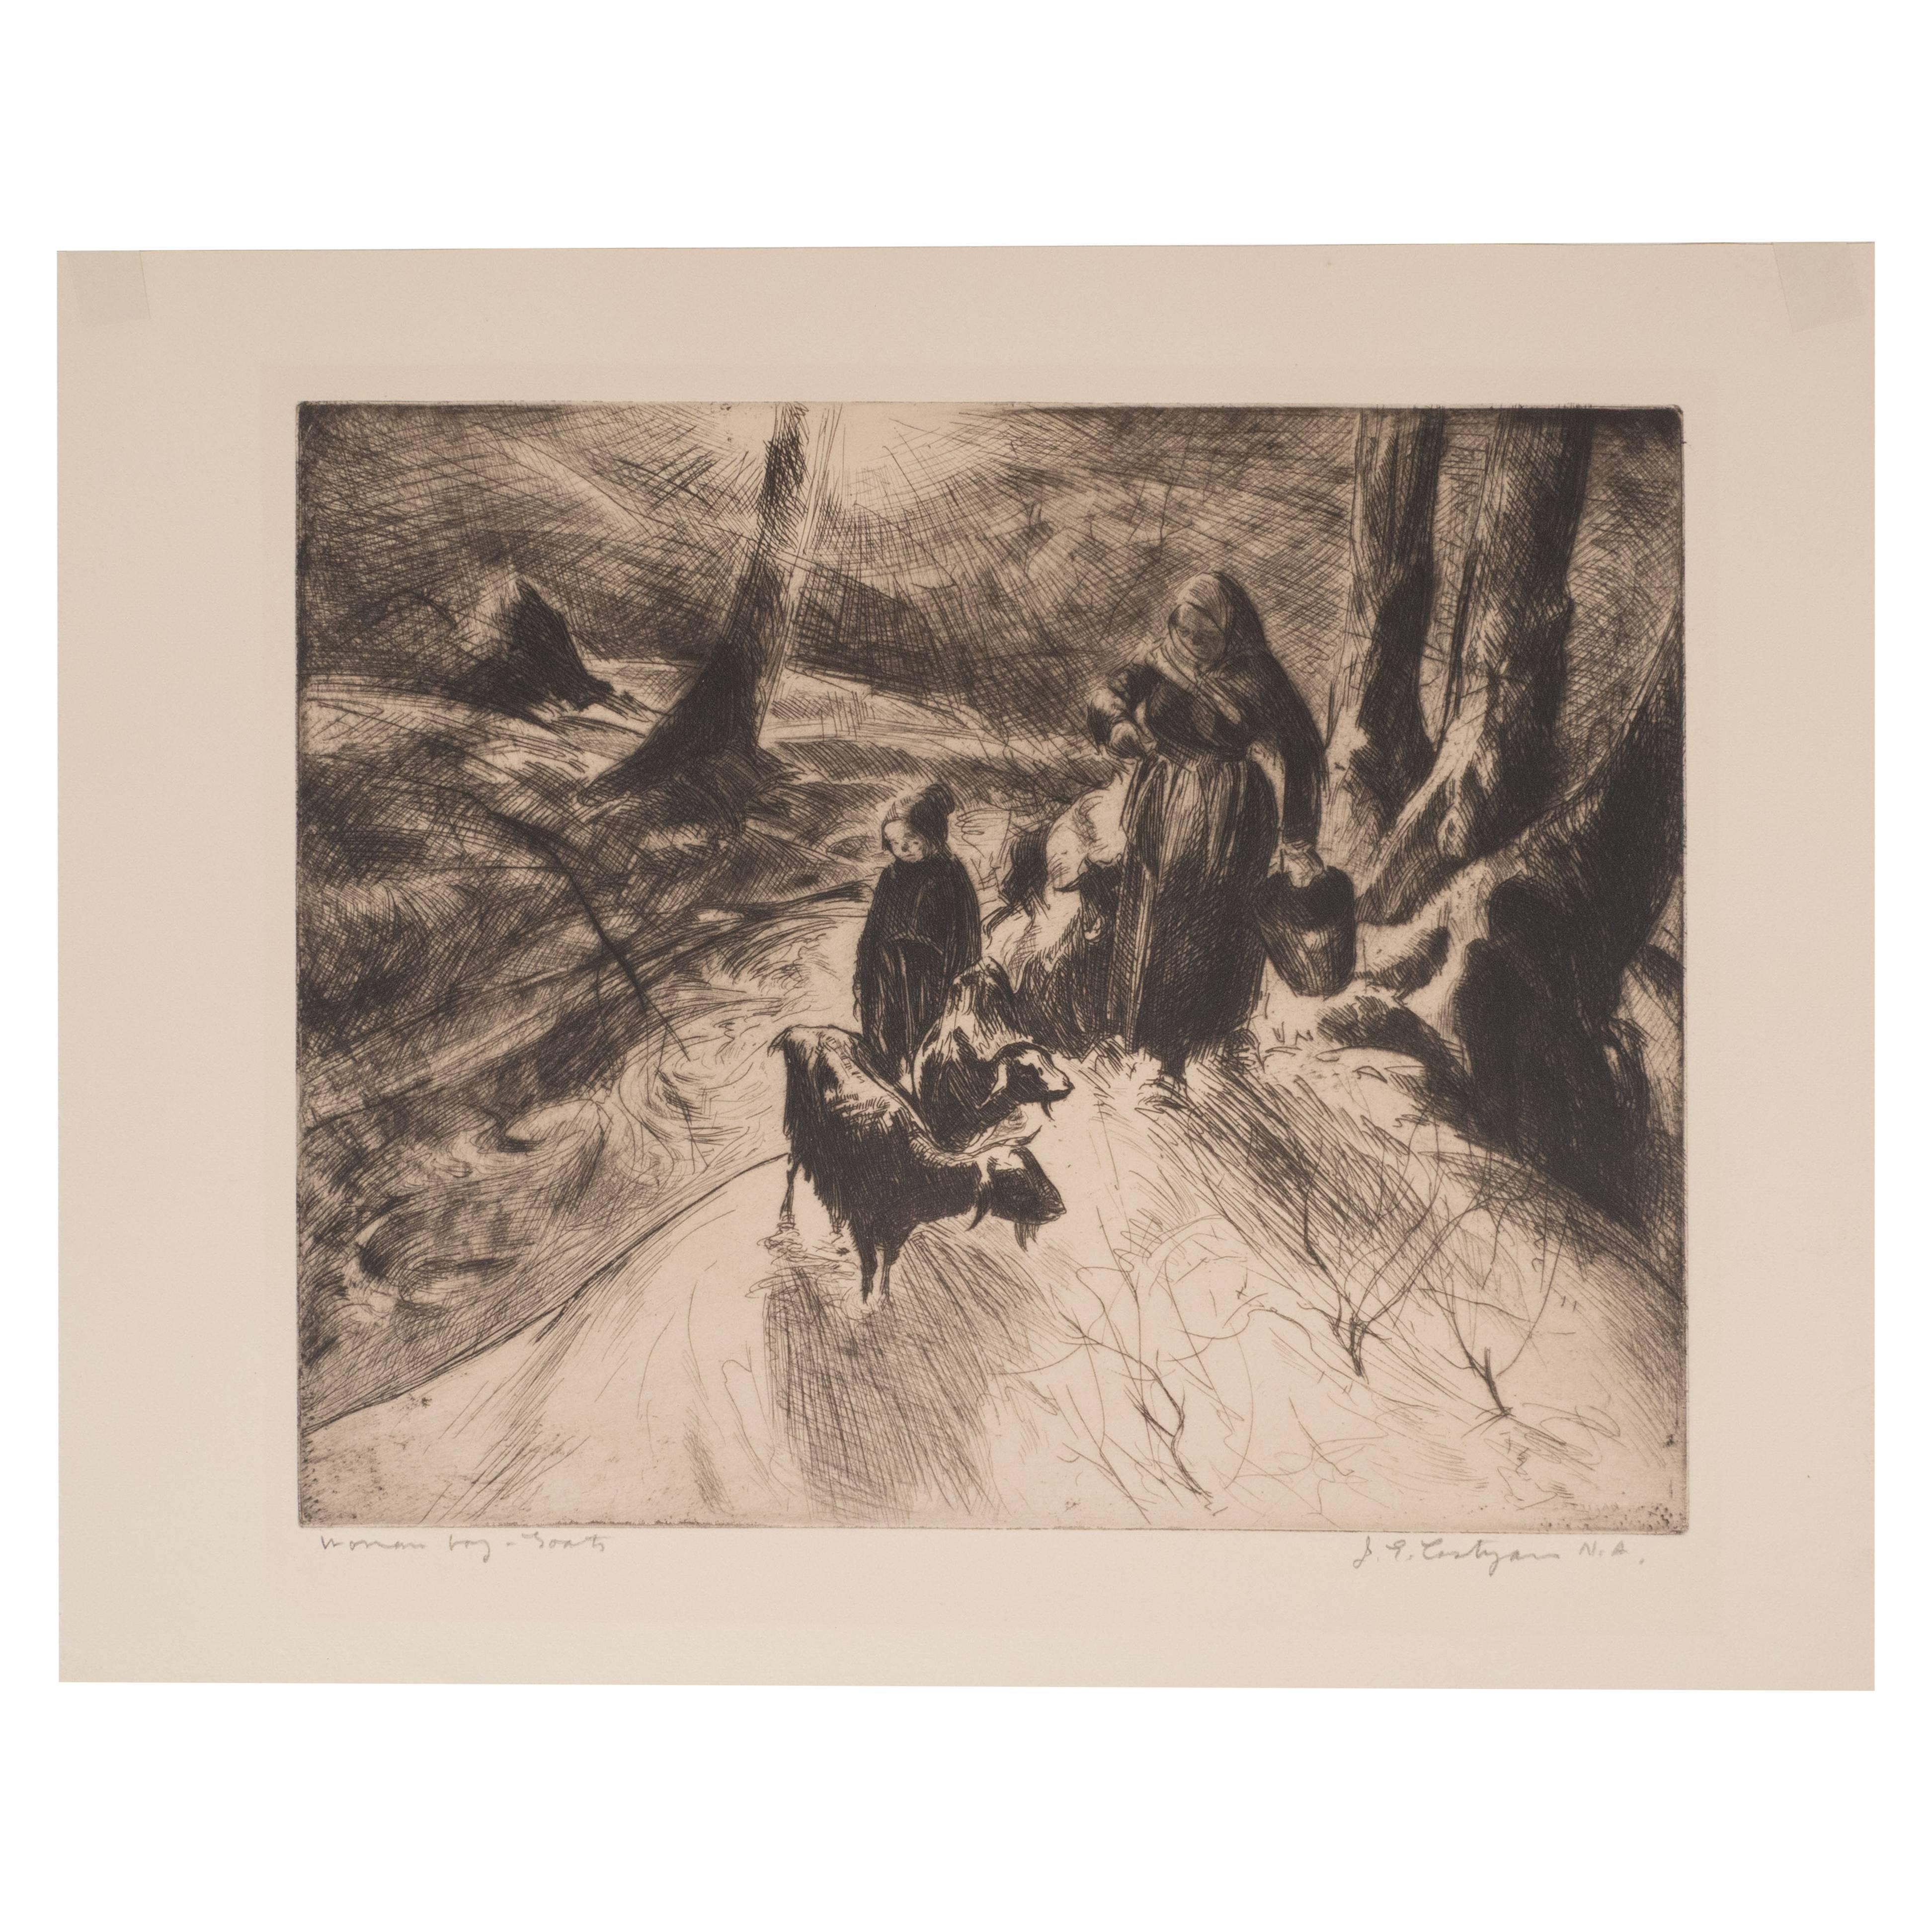 "Woman, Boy and Goats", Original Signed Etching by John E. Costigan